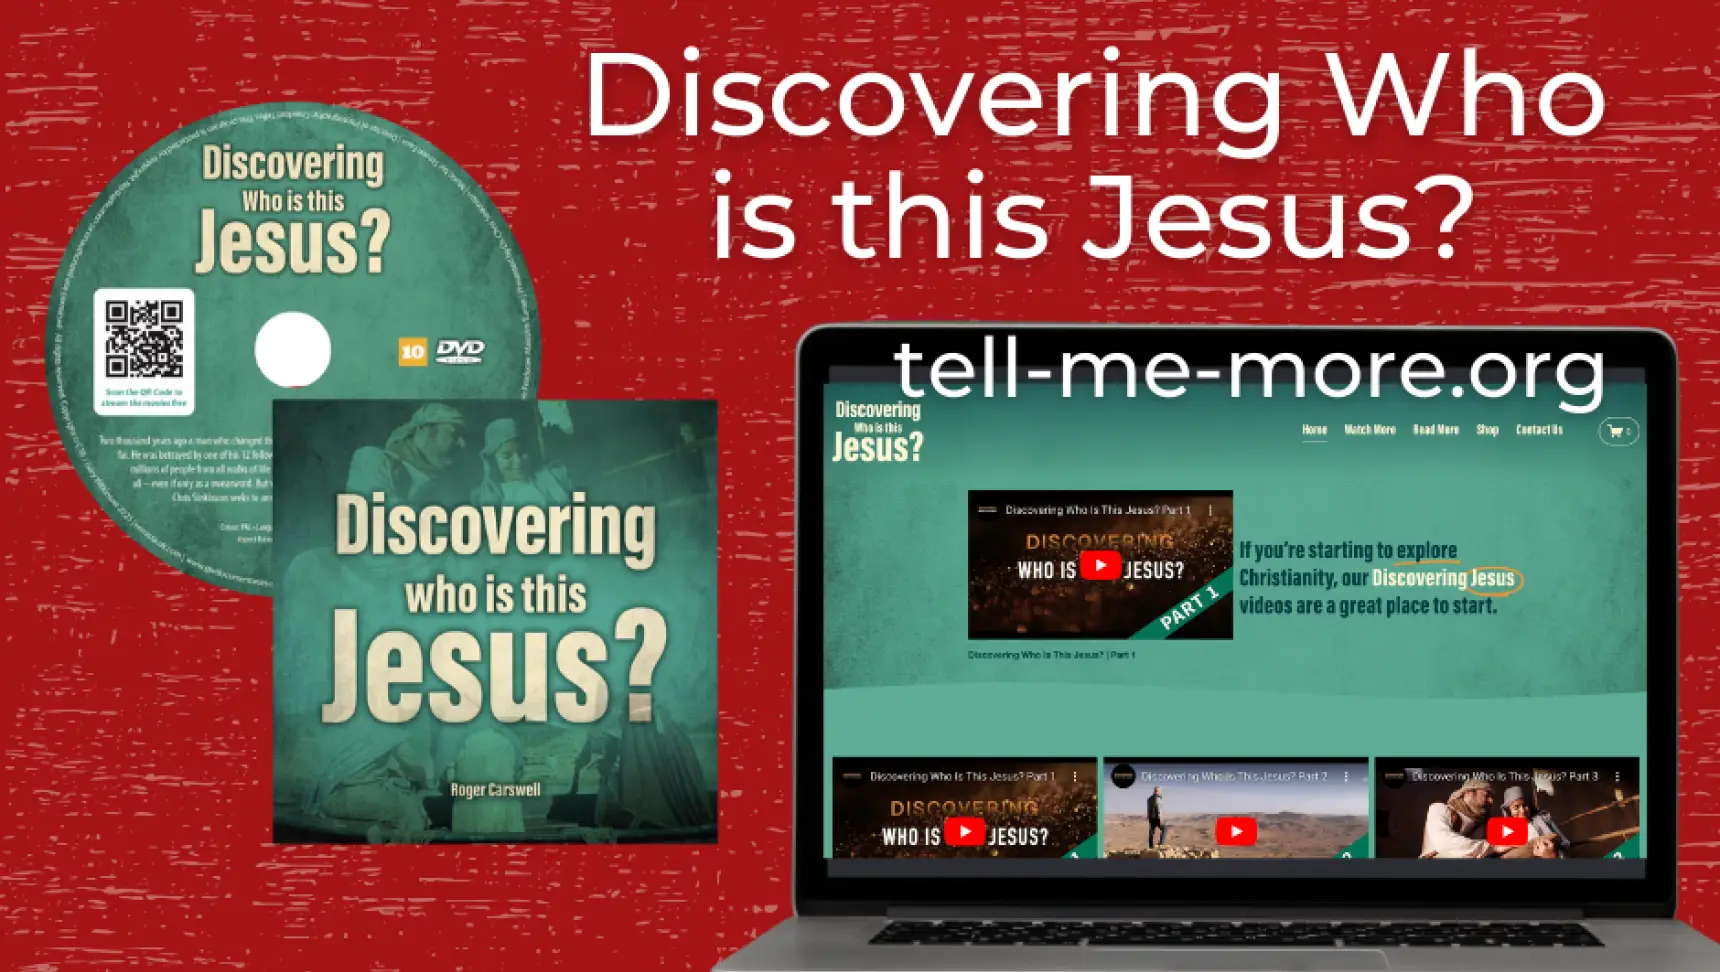 point-to-jesus-christmas-discovering-who-is-this-jesus.png